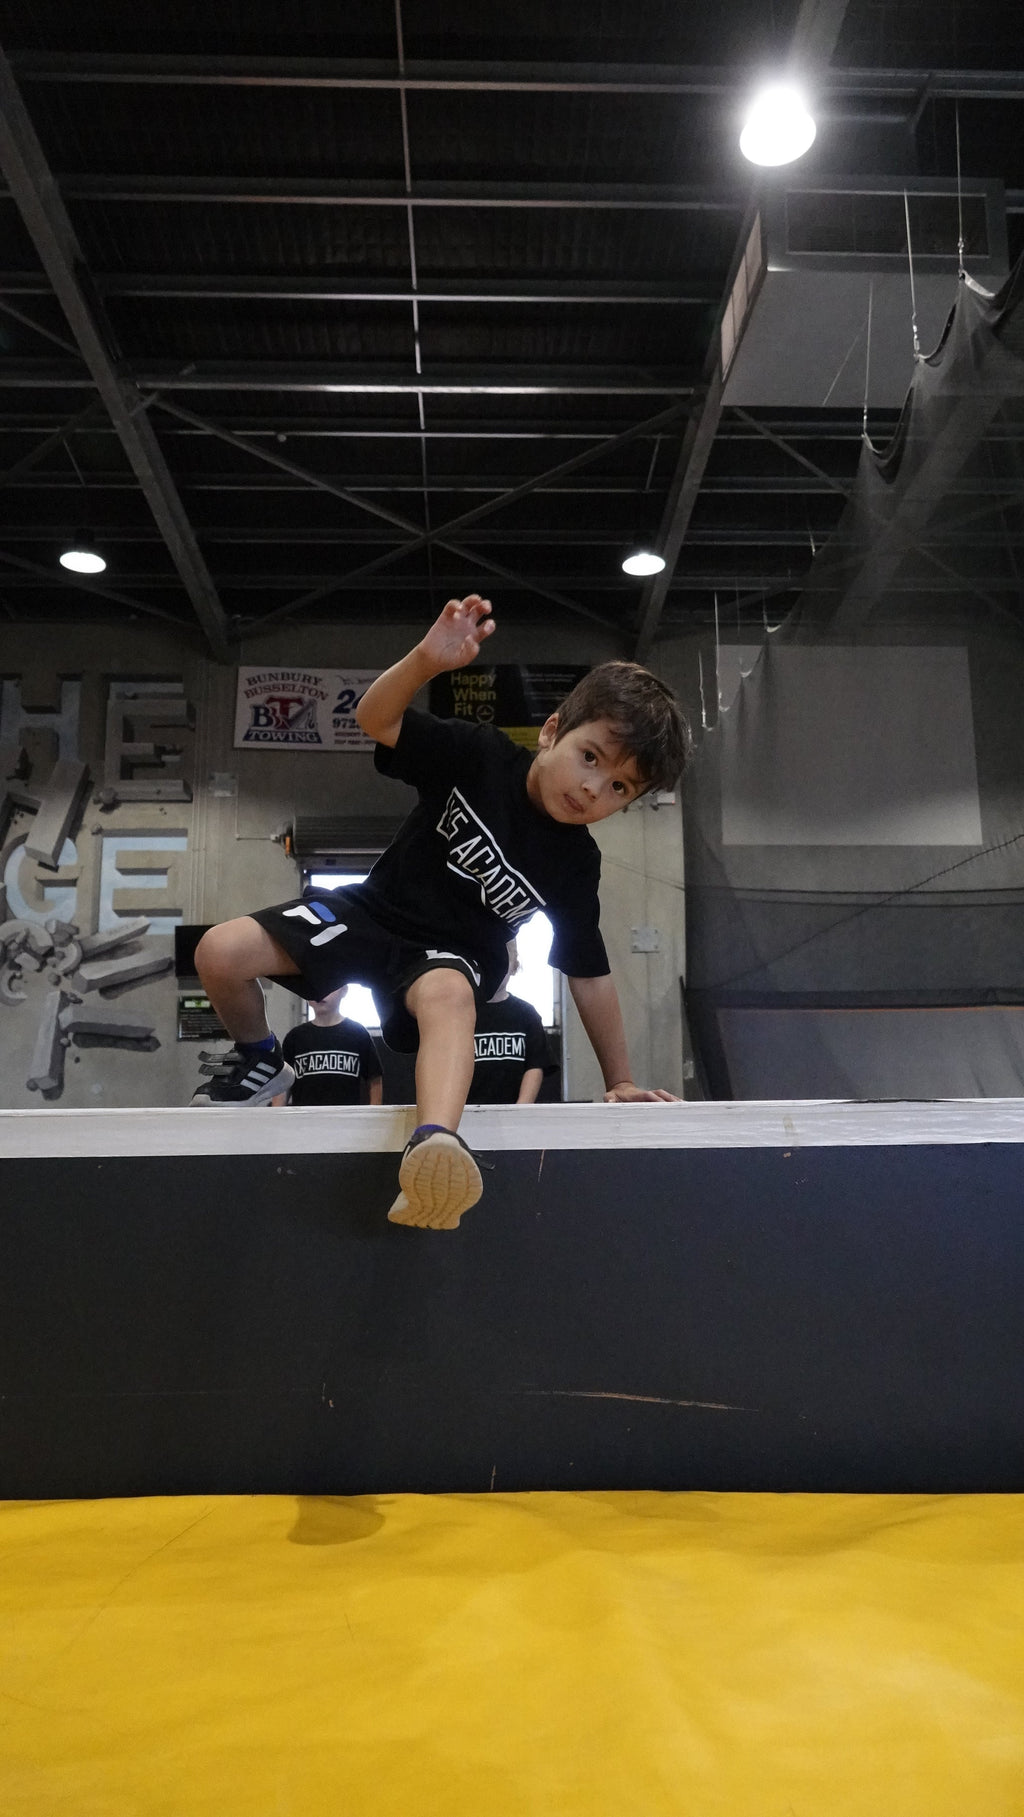 PEE-WEE PARKOUR:   . 3-4 YRS FRIDAY 9:30-10:00 TERM 2